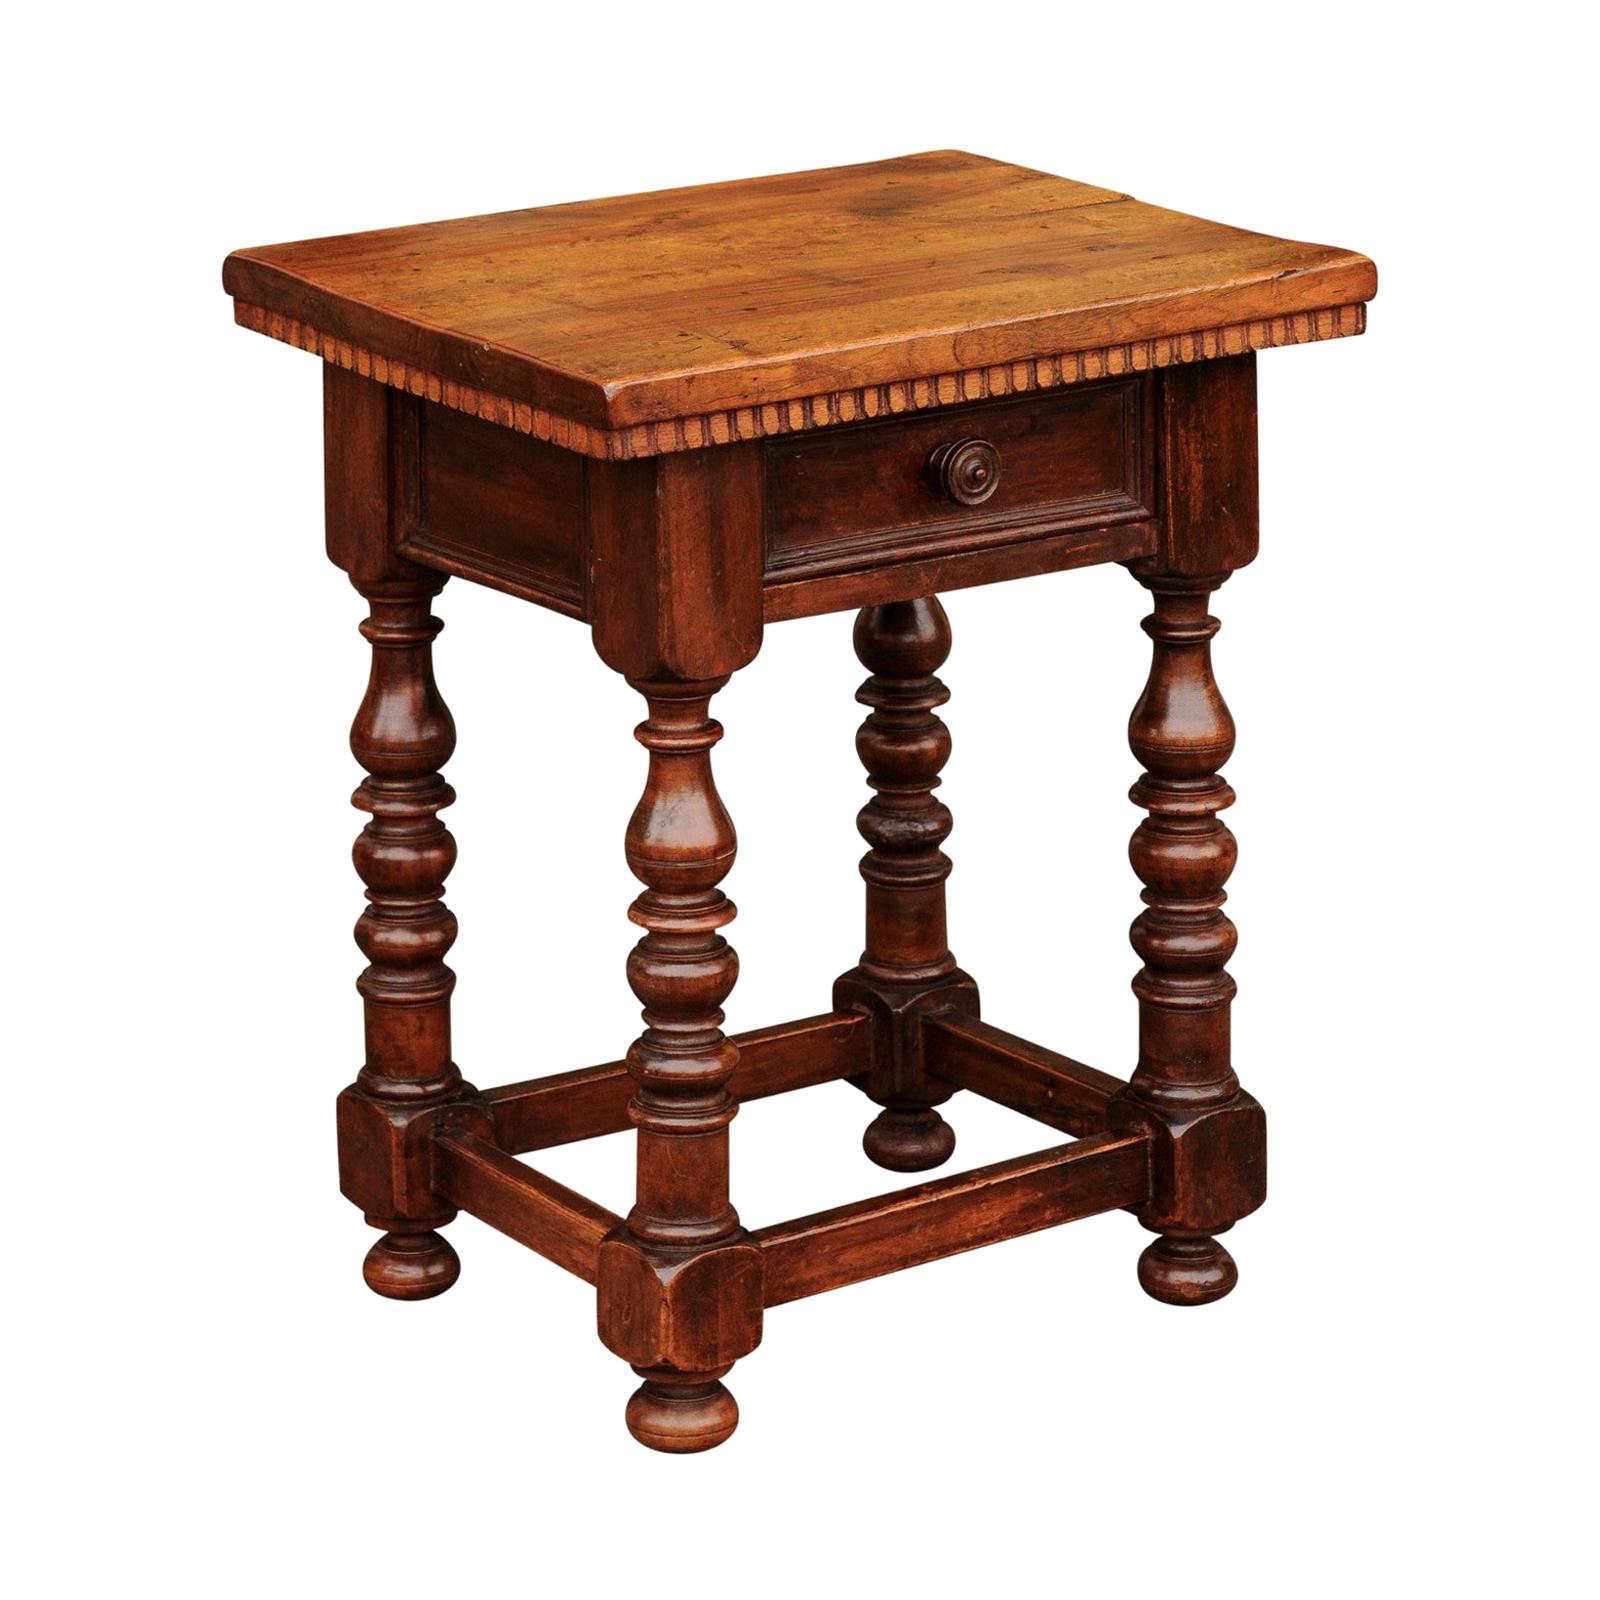 Italian 1870s Walnut Side Table with Dentil Molding, Drawer and Turned Base For Sale